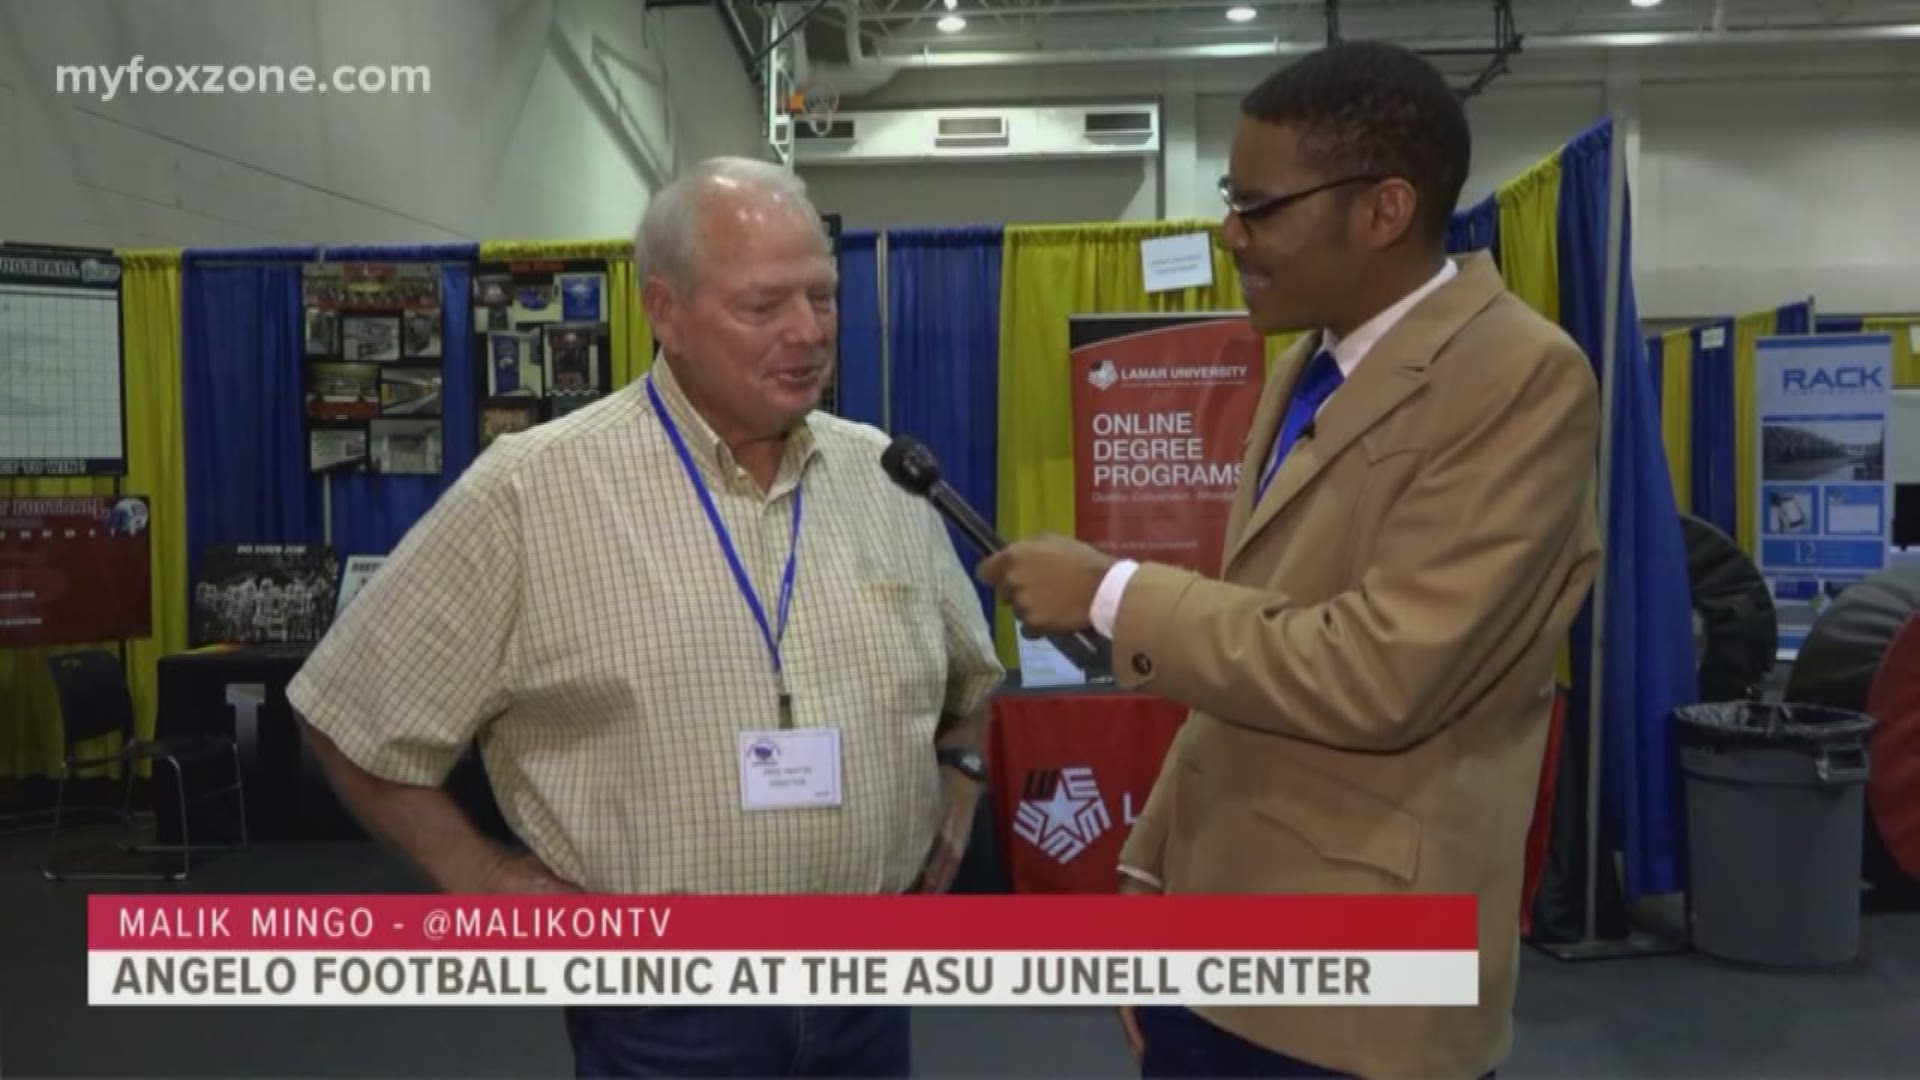 Our Malik Mingo is live at the Junell Center on the Angelo State University campus with details about the 45th annual 'Angelo Football Clinic'